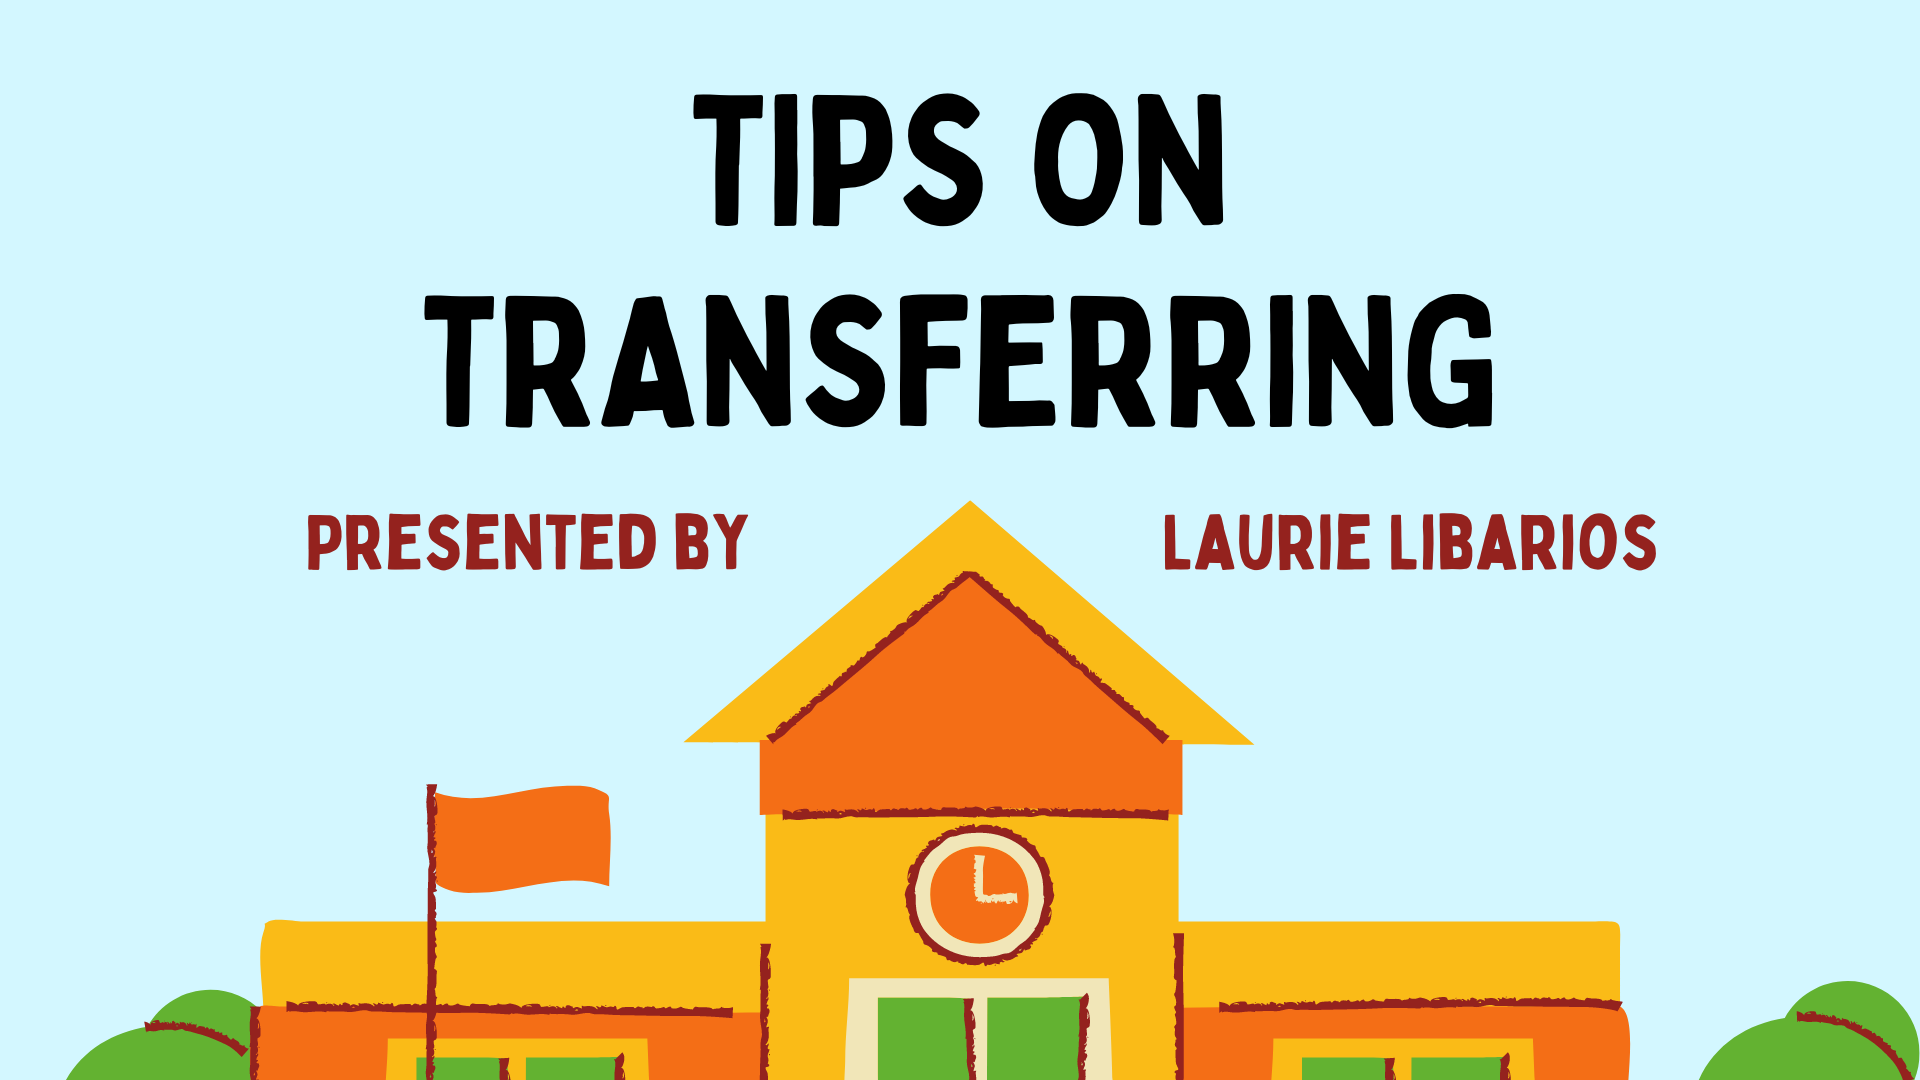 Tips on Transferring - presented by Laurie Libarios